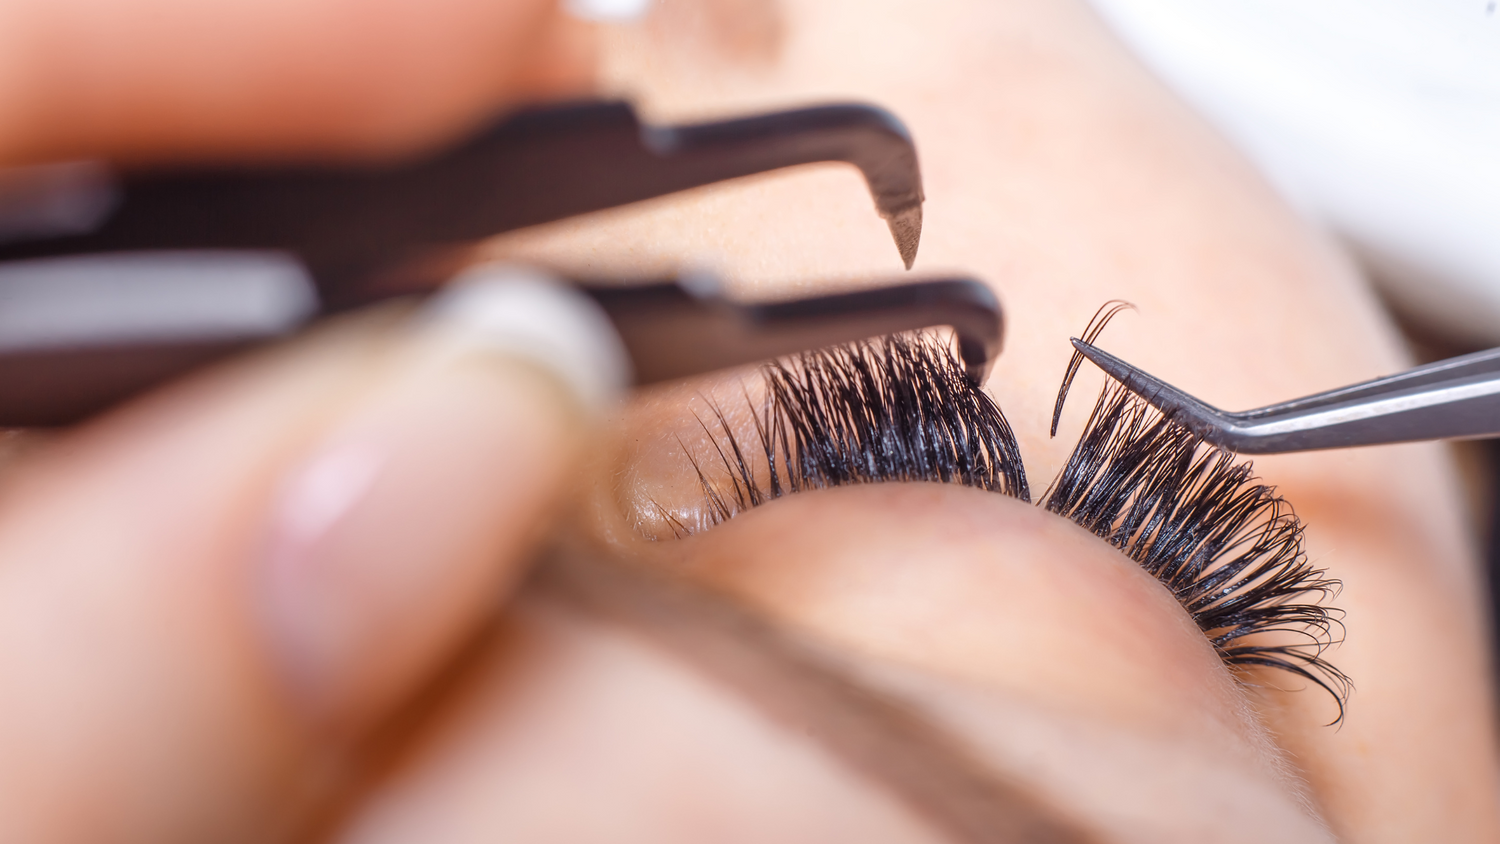 How to Look After Your Lash Extensions